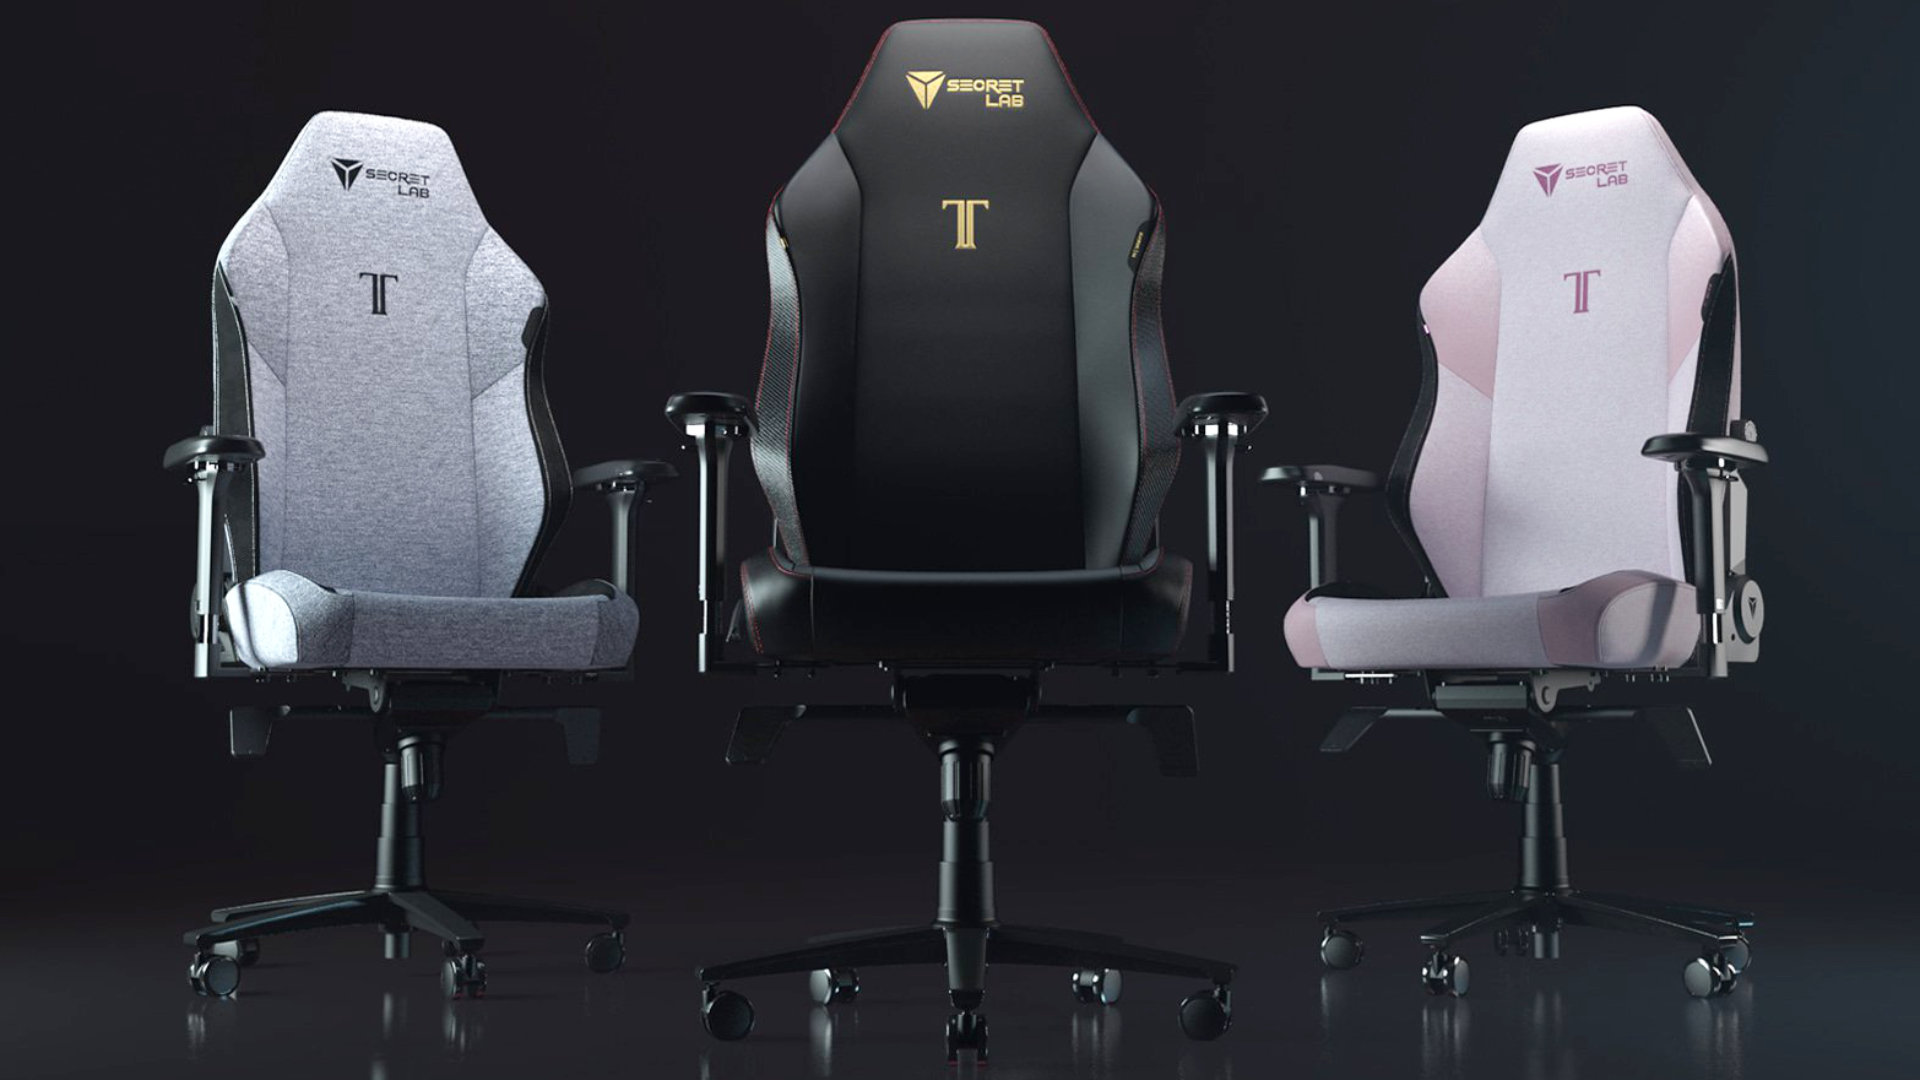 Secretlab's new 2022 gaming chairs are lined up